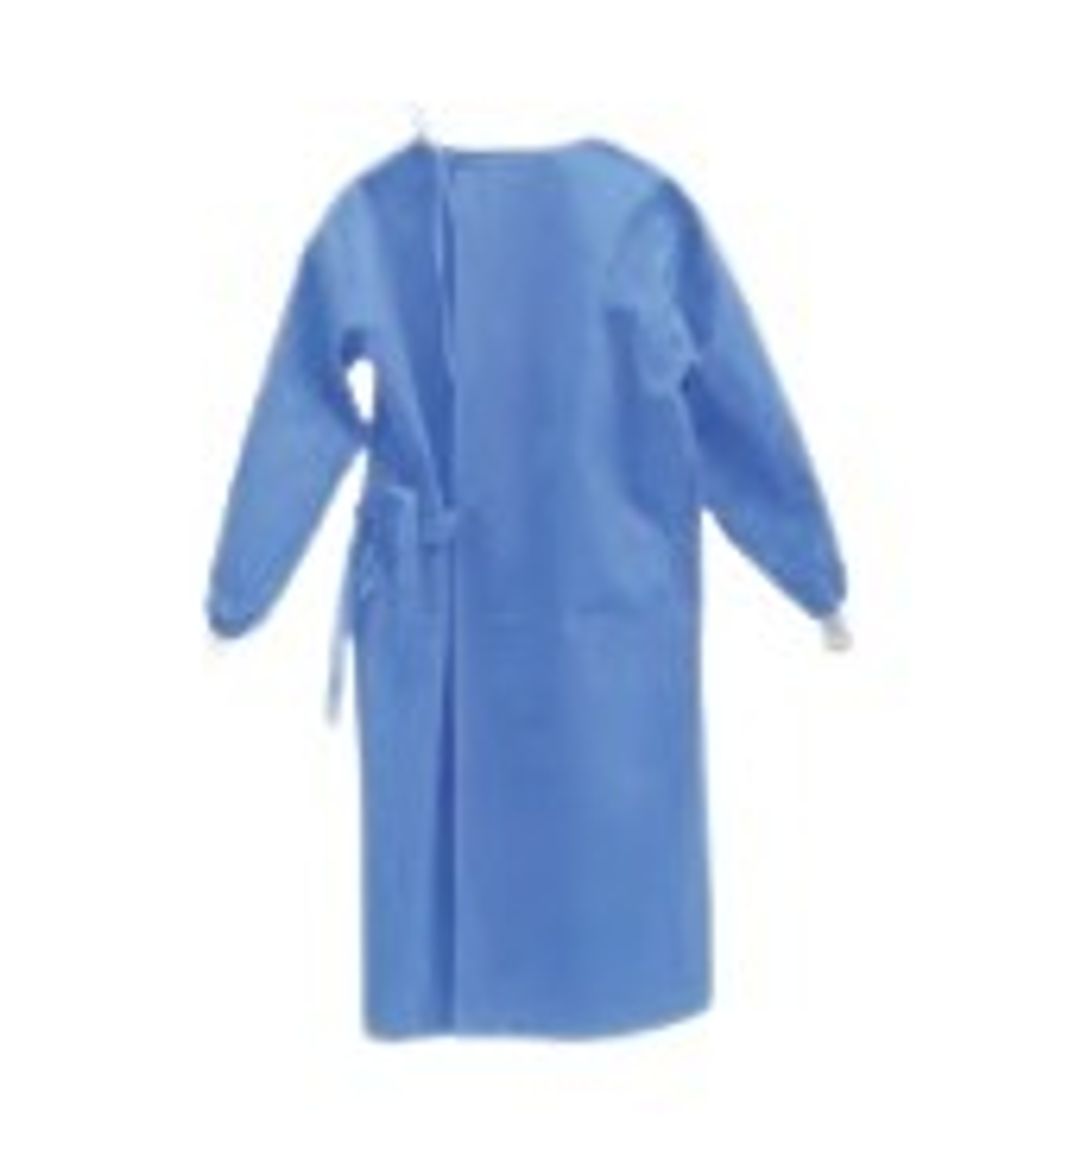 10 x  Lomar Patient Gowns - 35 GSM Dark Blue - Pack of 1